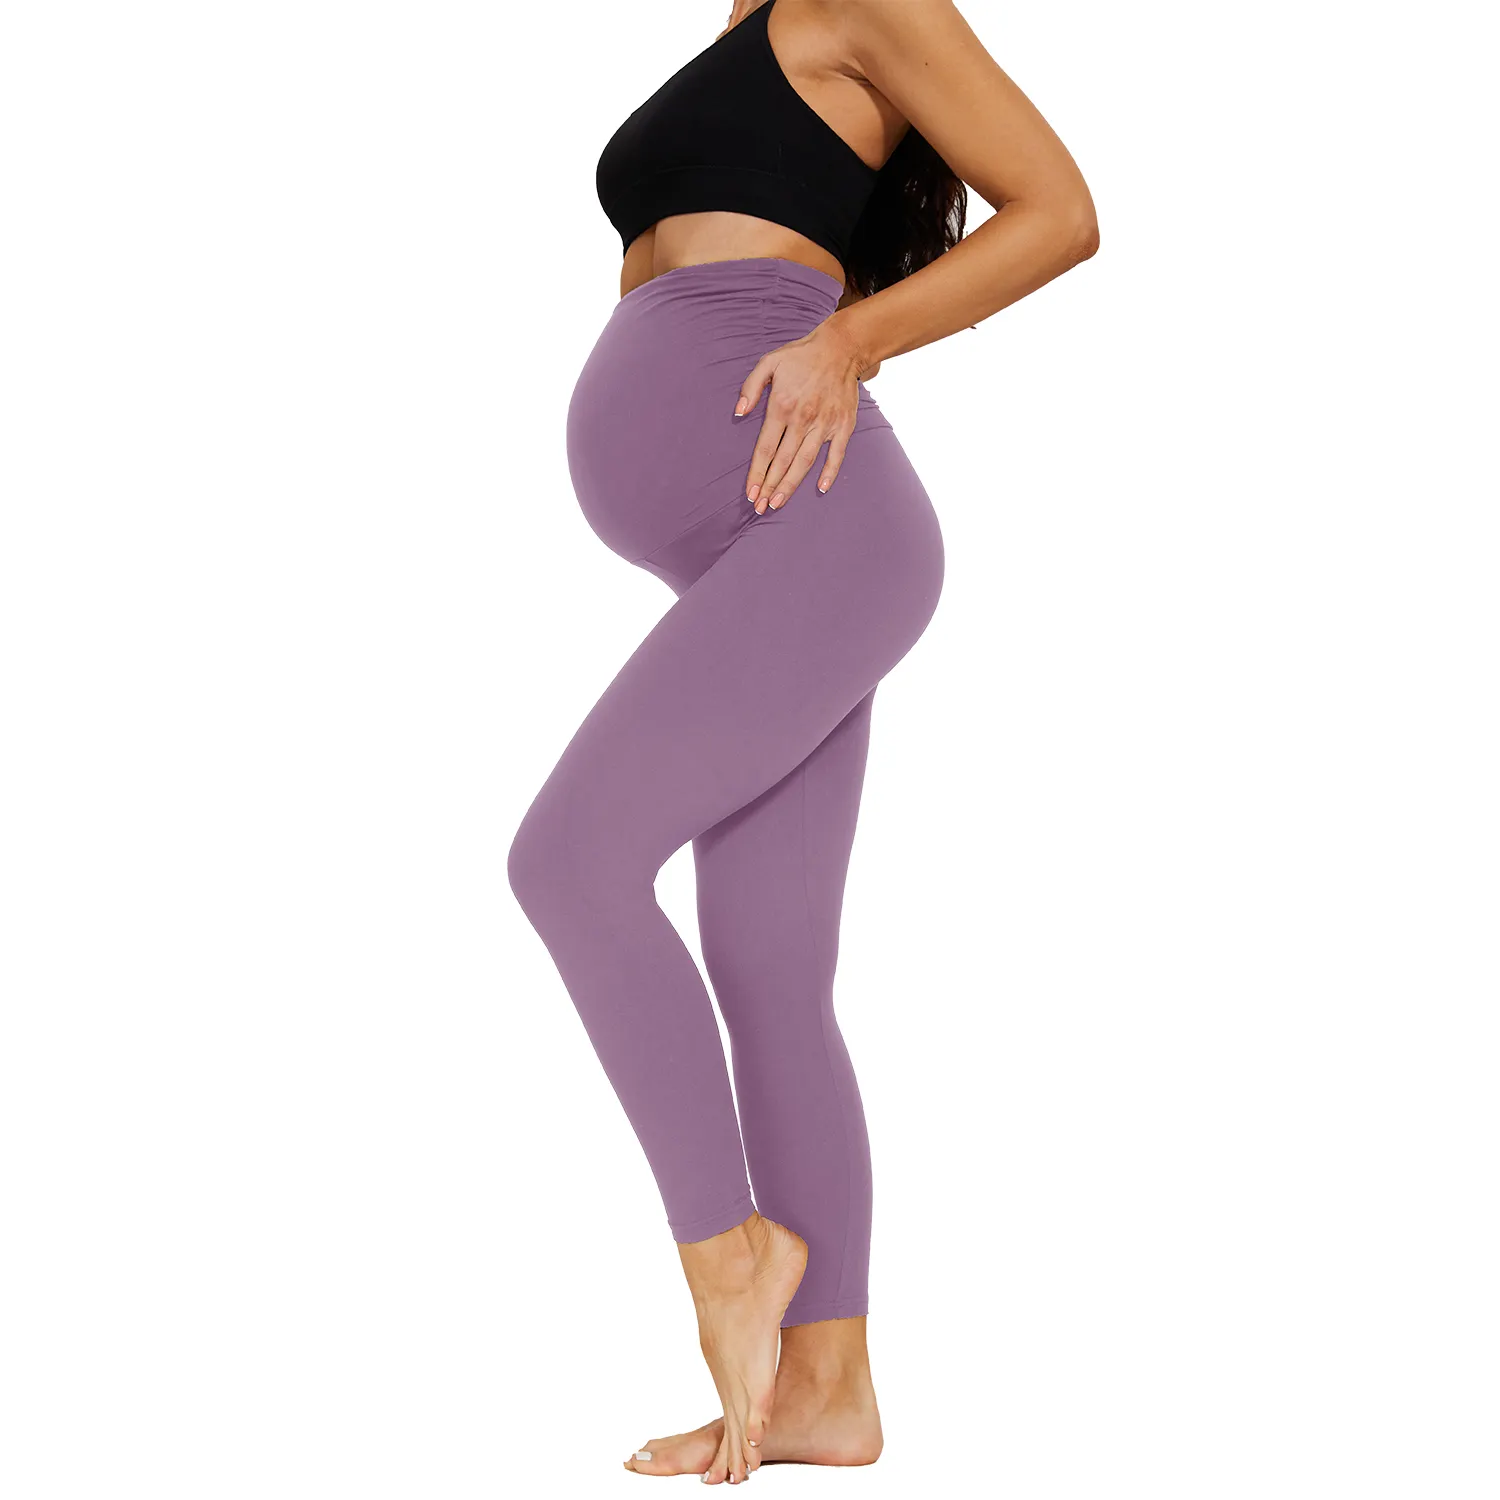 Women's Maternity Workout Leggings Over The Belly Pregnancy Stretch Yoga Active Pants